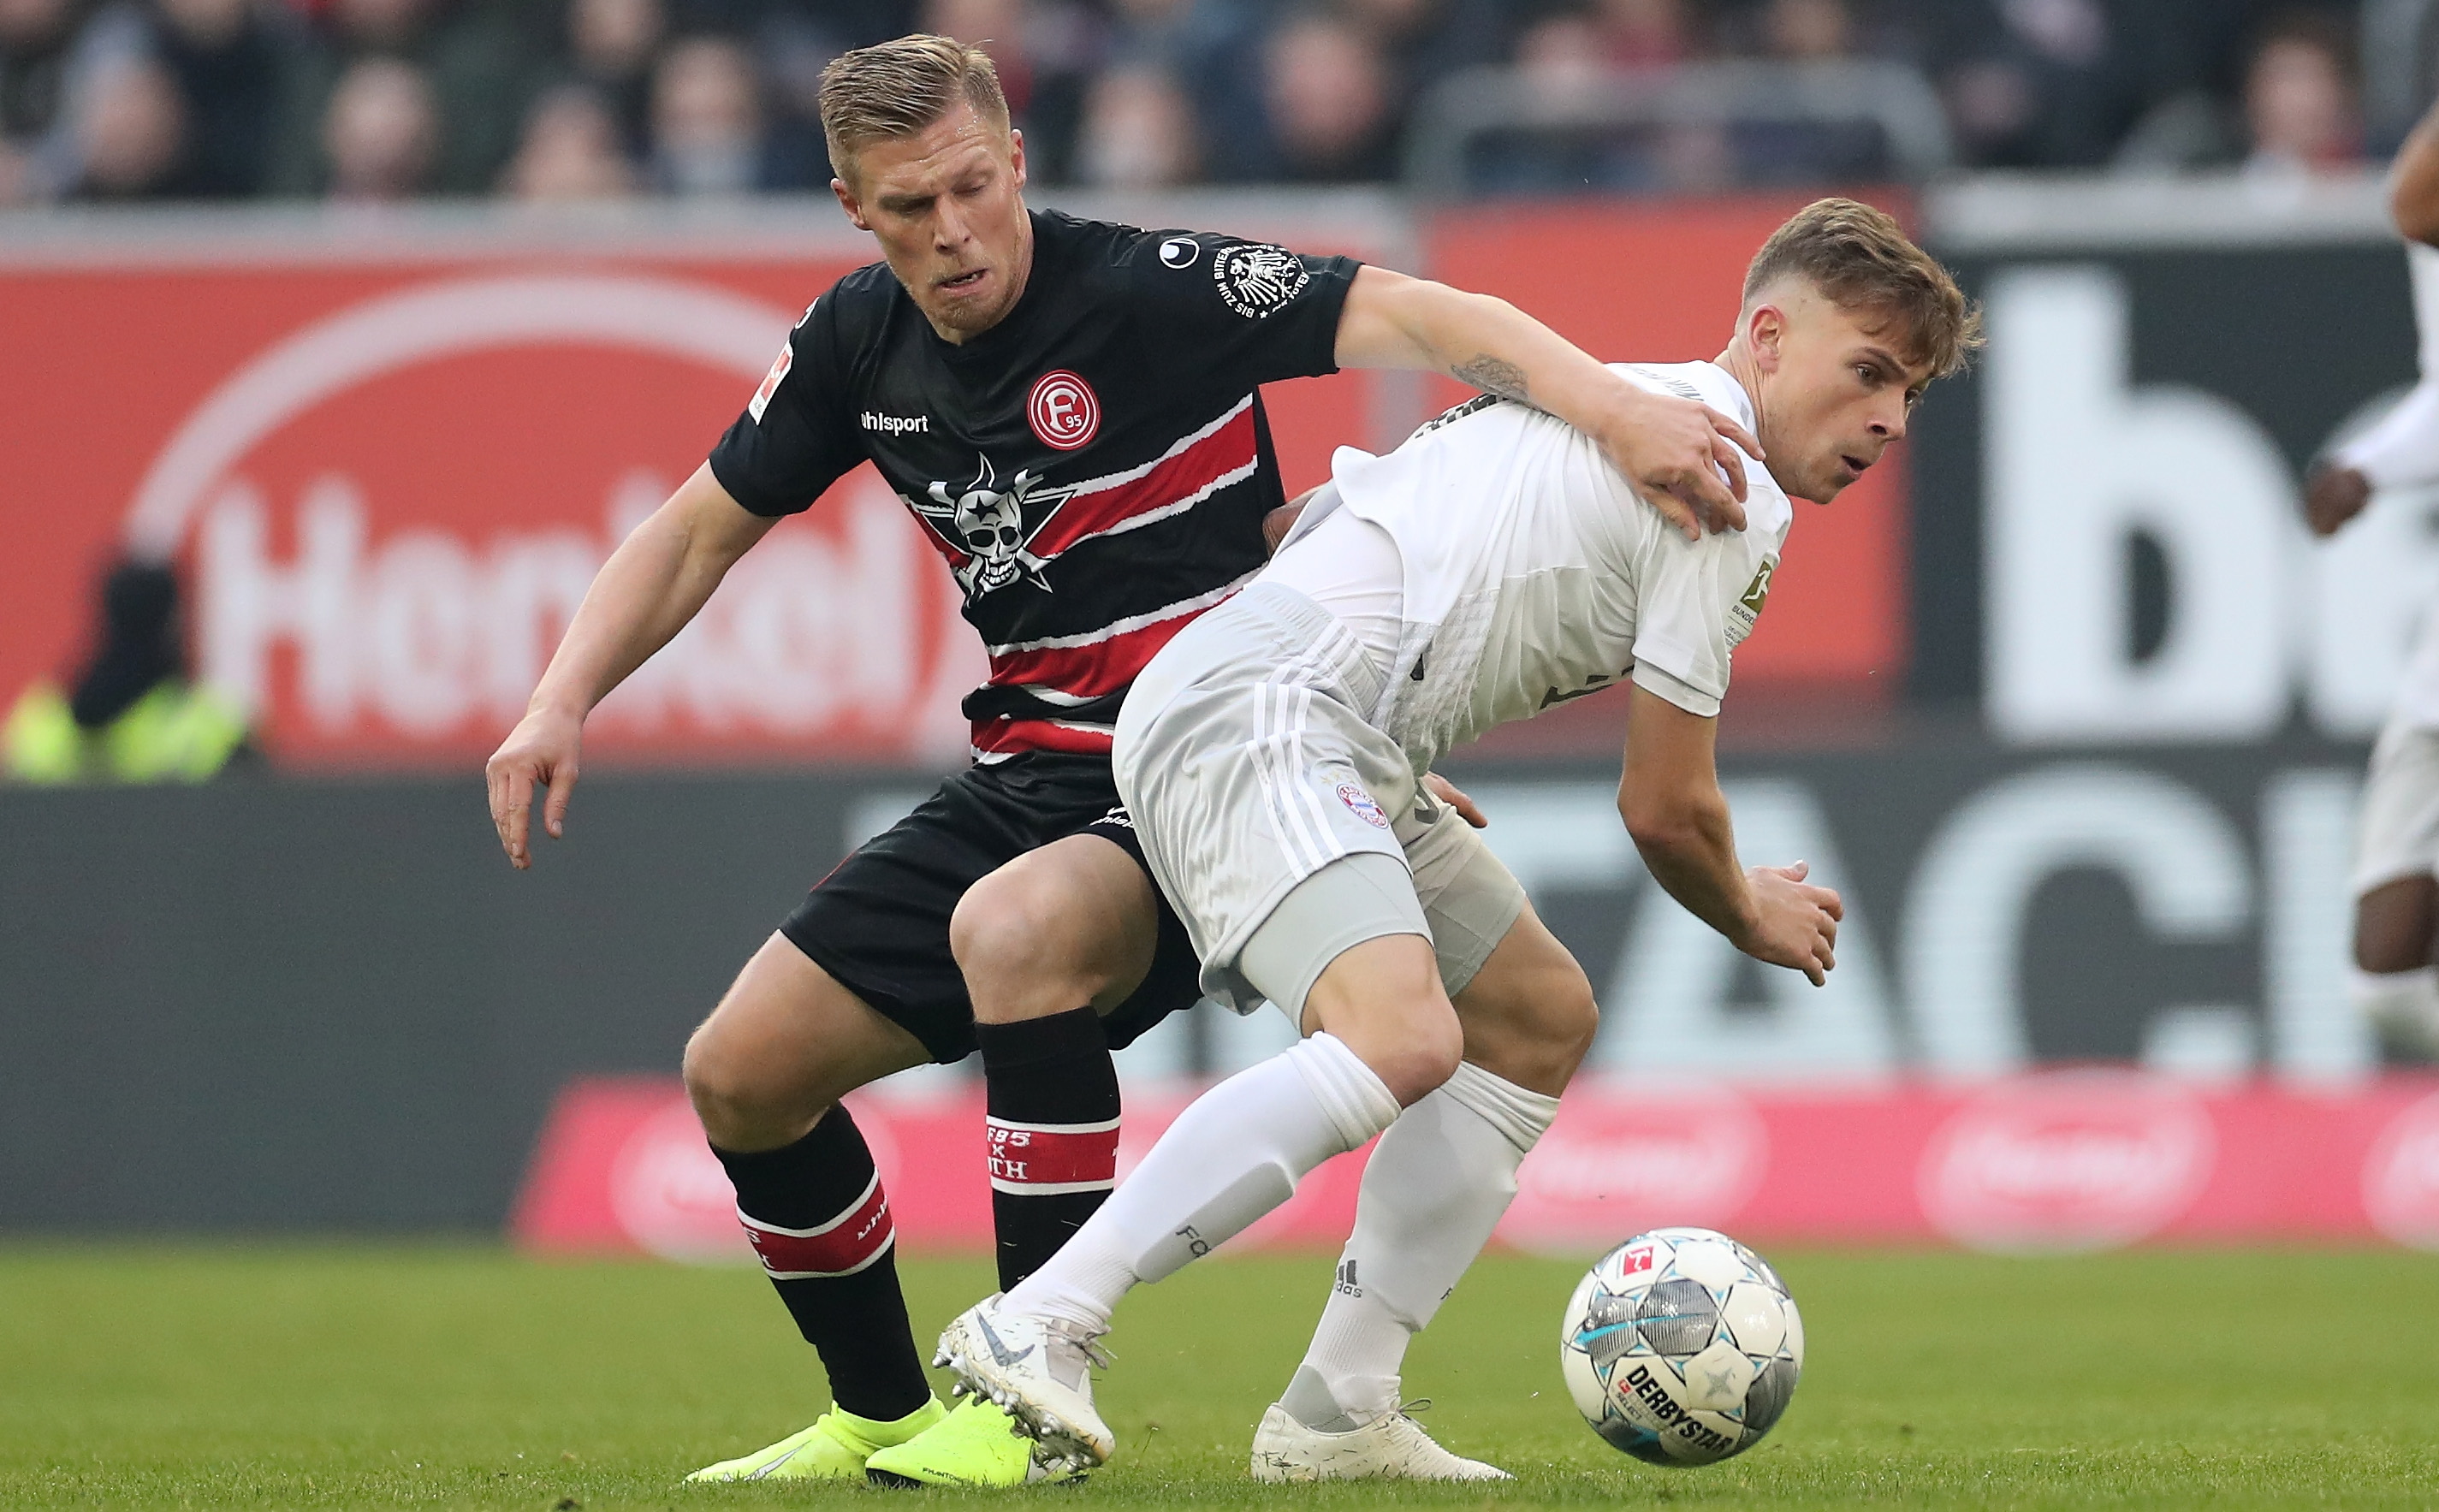 epa08019618 Bayern's Joshua Kimmich (R) in action with Duesseldorf's Rouwen Hennings (L) during the German Bundesliga soccer match between Fortuna Duesseldorf and FC Bayern Munich in Duesseldorf, Germany, 23 November 2019.  EPA/FRIEDEMANN VOGEL CONDITIONS - ATTENTION: The DFL regulations prohibit any use of photographs as image sequences and/or quasi-video.